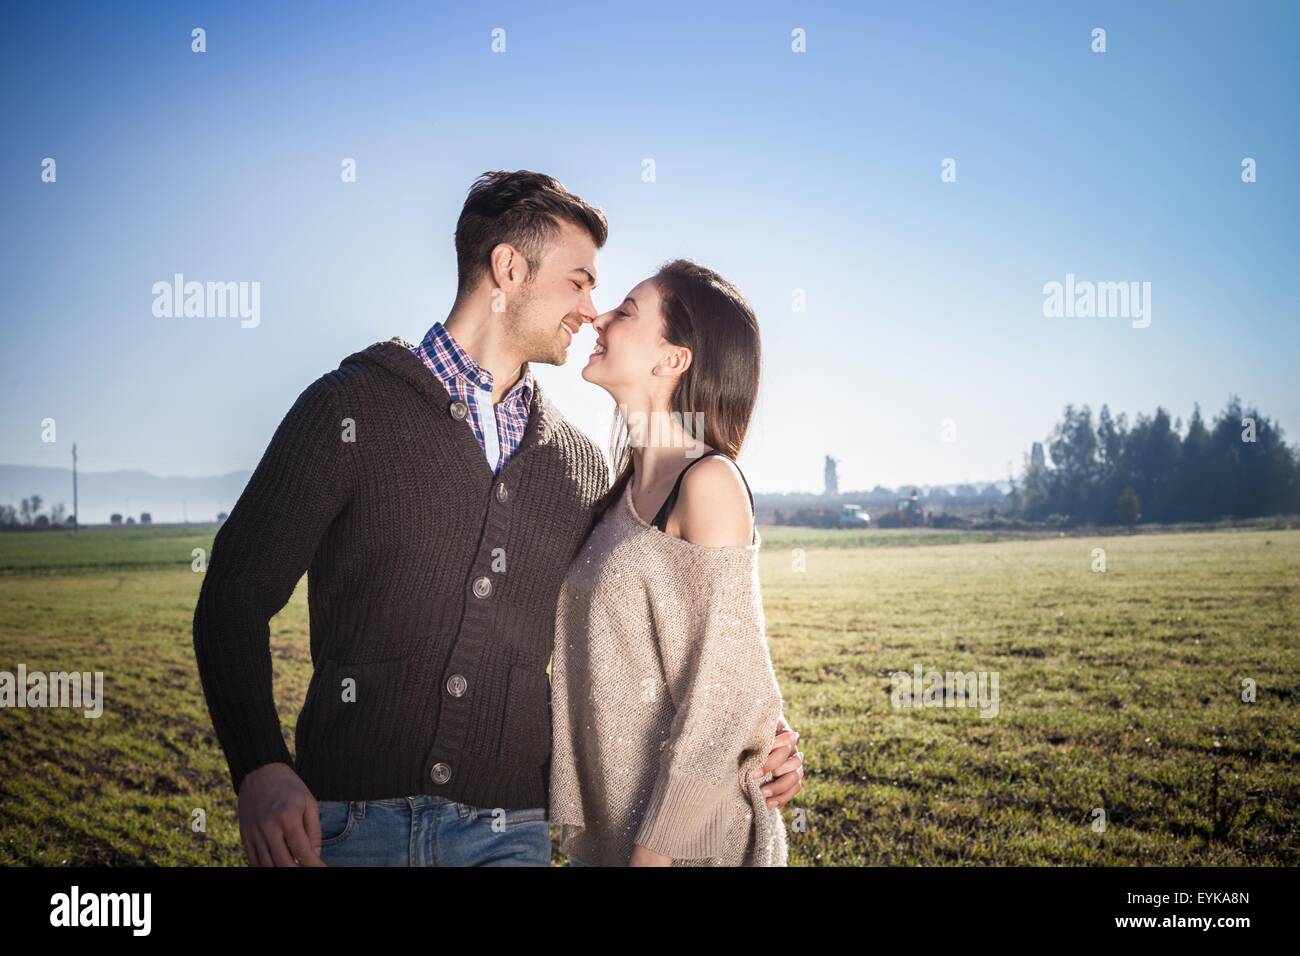 Jeune couple hugging in field Banque D'Images